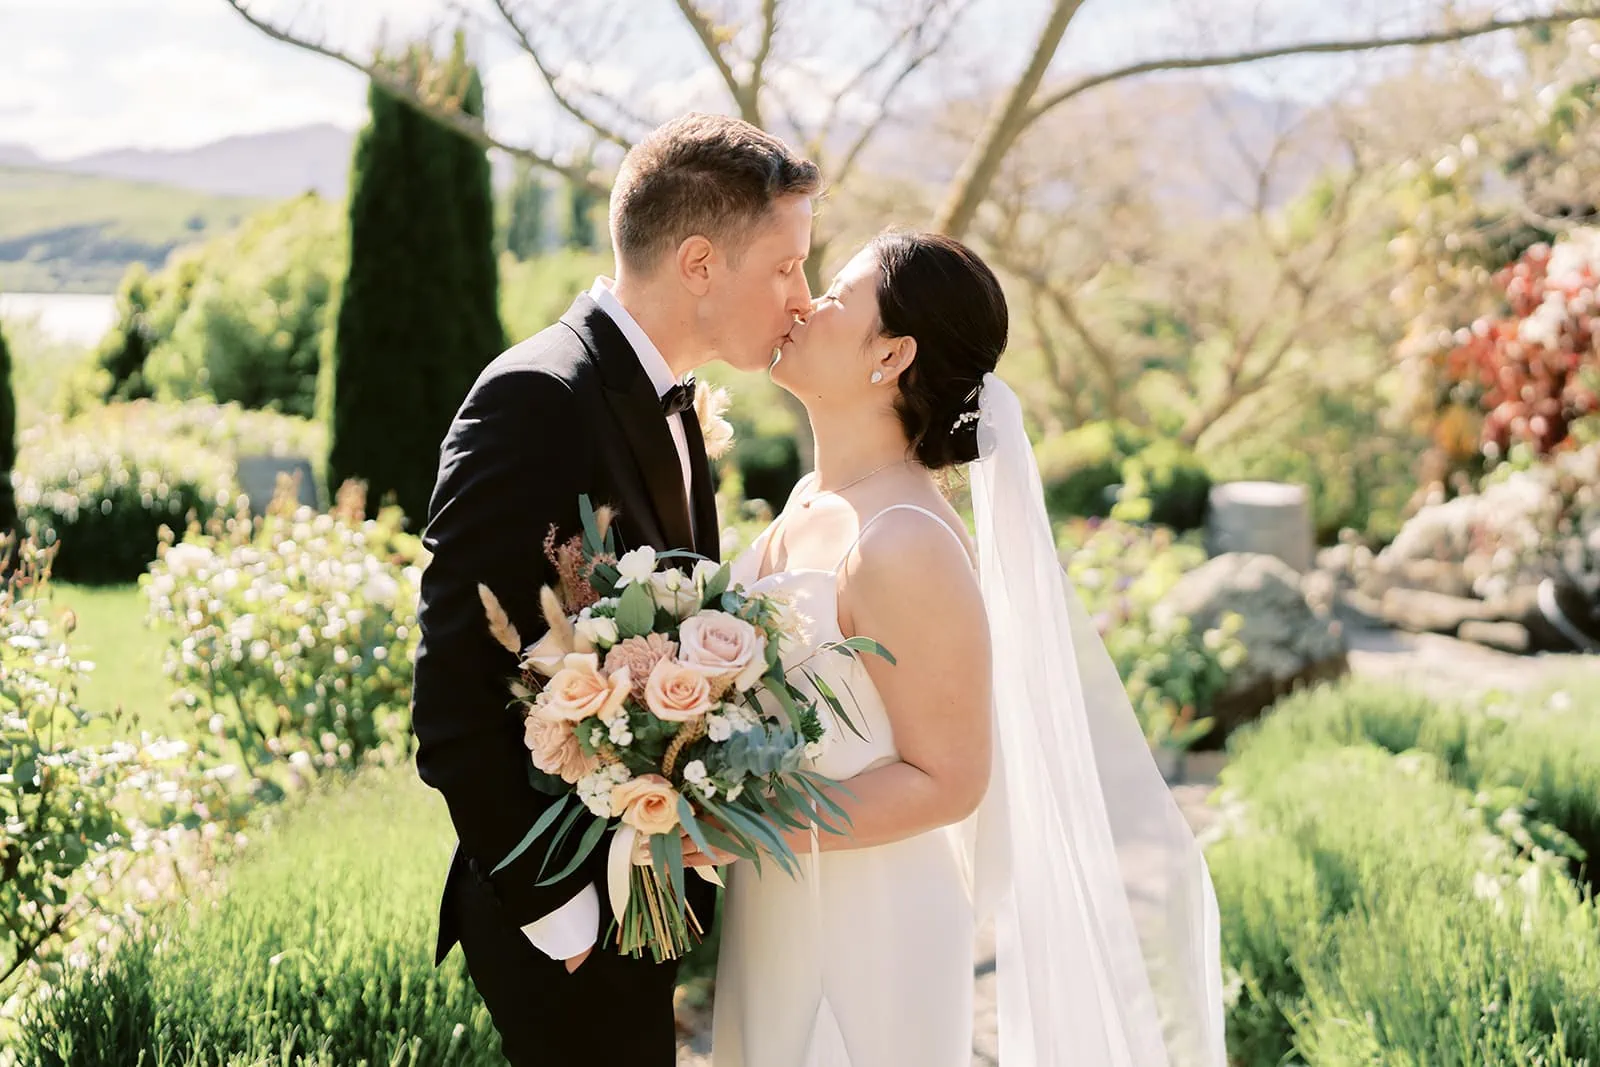 Queenstown Elopement Heli Wedding Photographer クイーンズタウン結婚式 | Mj and Shane, a bride and groom, sharing a romantic kiss during their beautiful garden wedding.